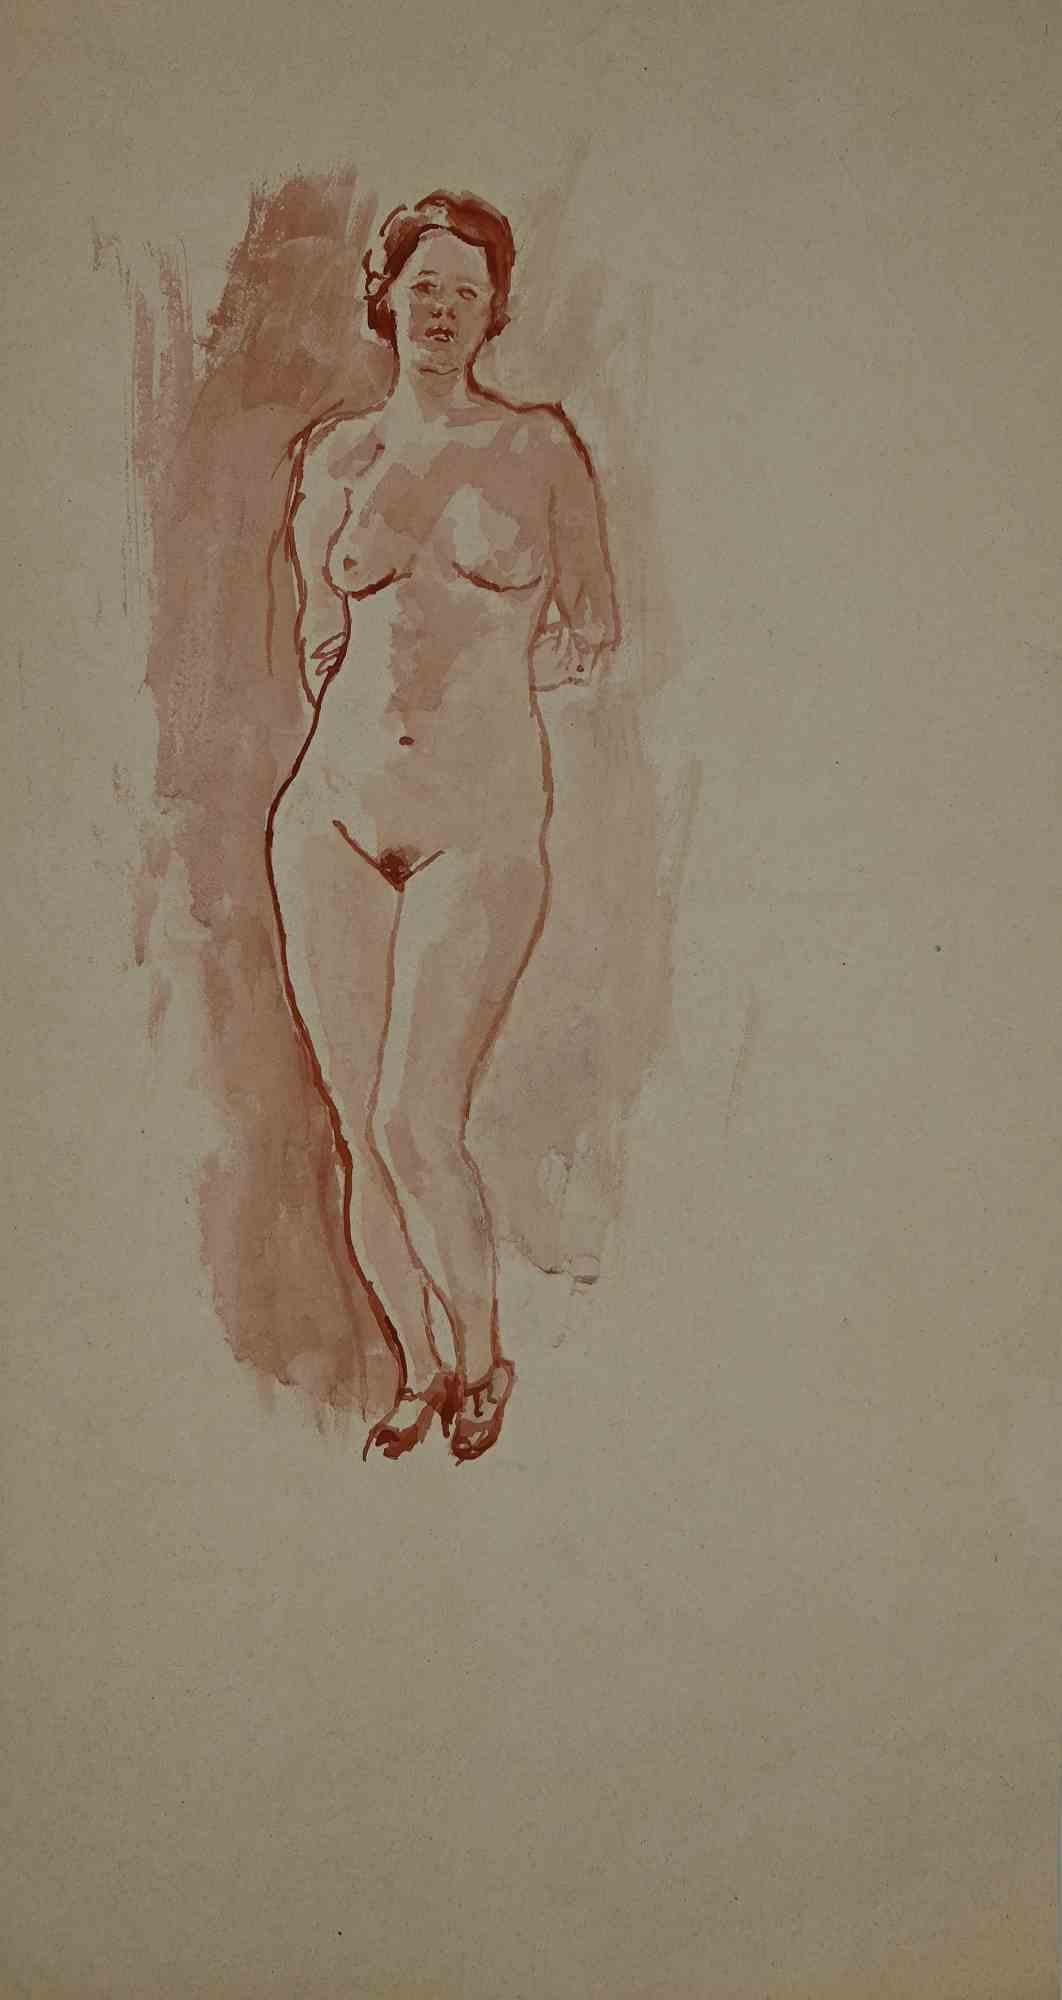 Nude is an original Watercolour realized by Mino Maccari in the Mid-20th Century.

Good condition on a yellowed paper.

No signature.

Mino Maccari (1898-1989) was an Italian writer, painter, engraver and journalist, winner the Feltrinelli Prize for